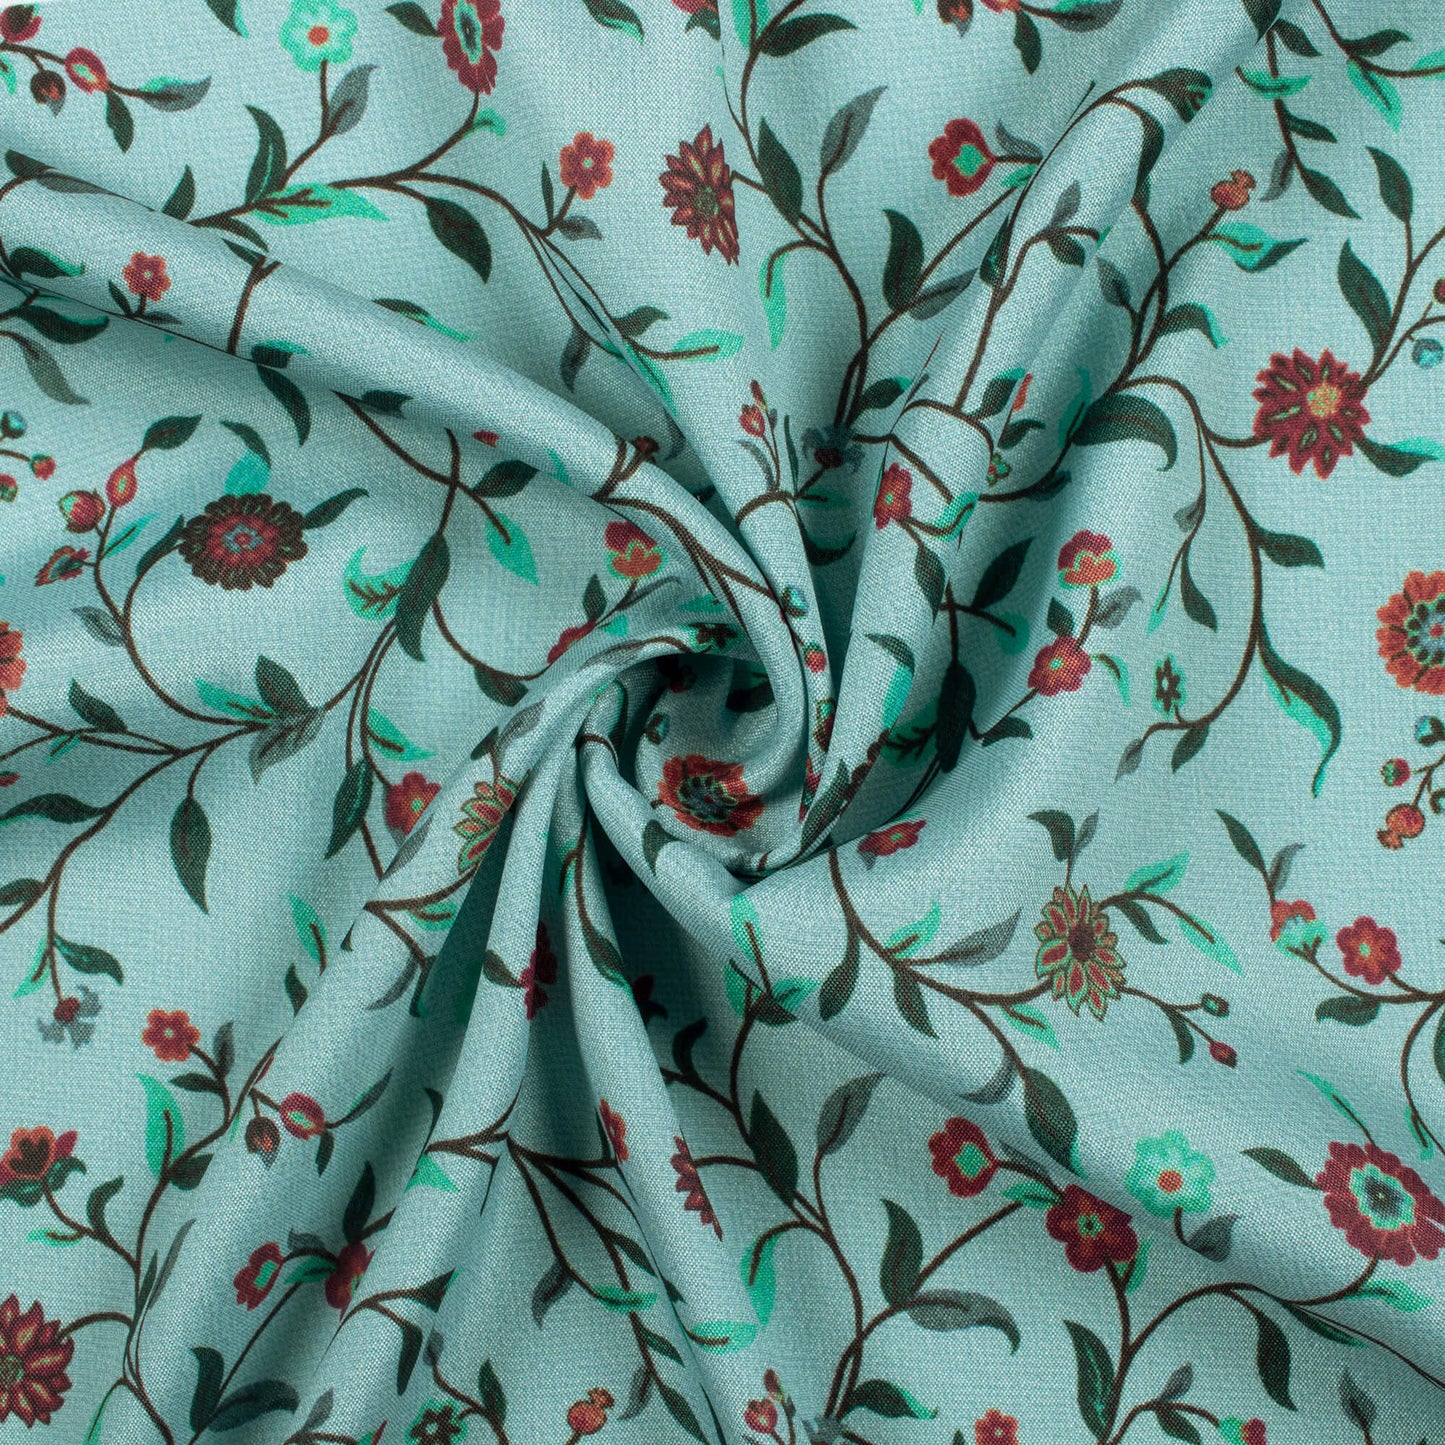 Pale Turquoise And Maroon Floral Pattern Digital Print Crepe Silk Fabric